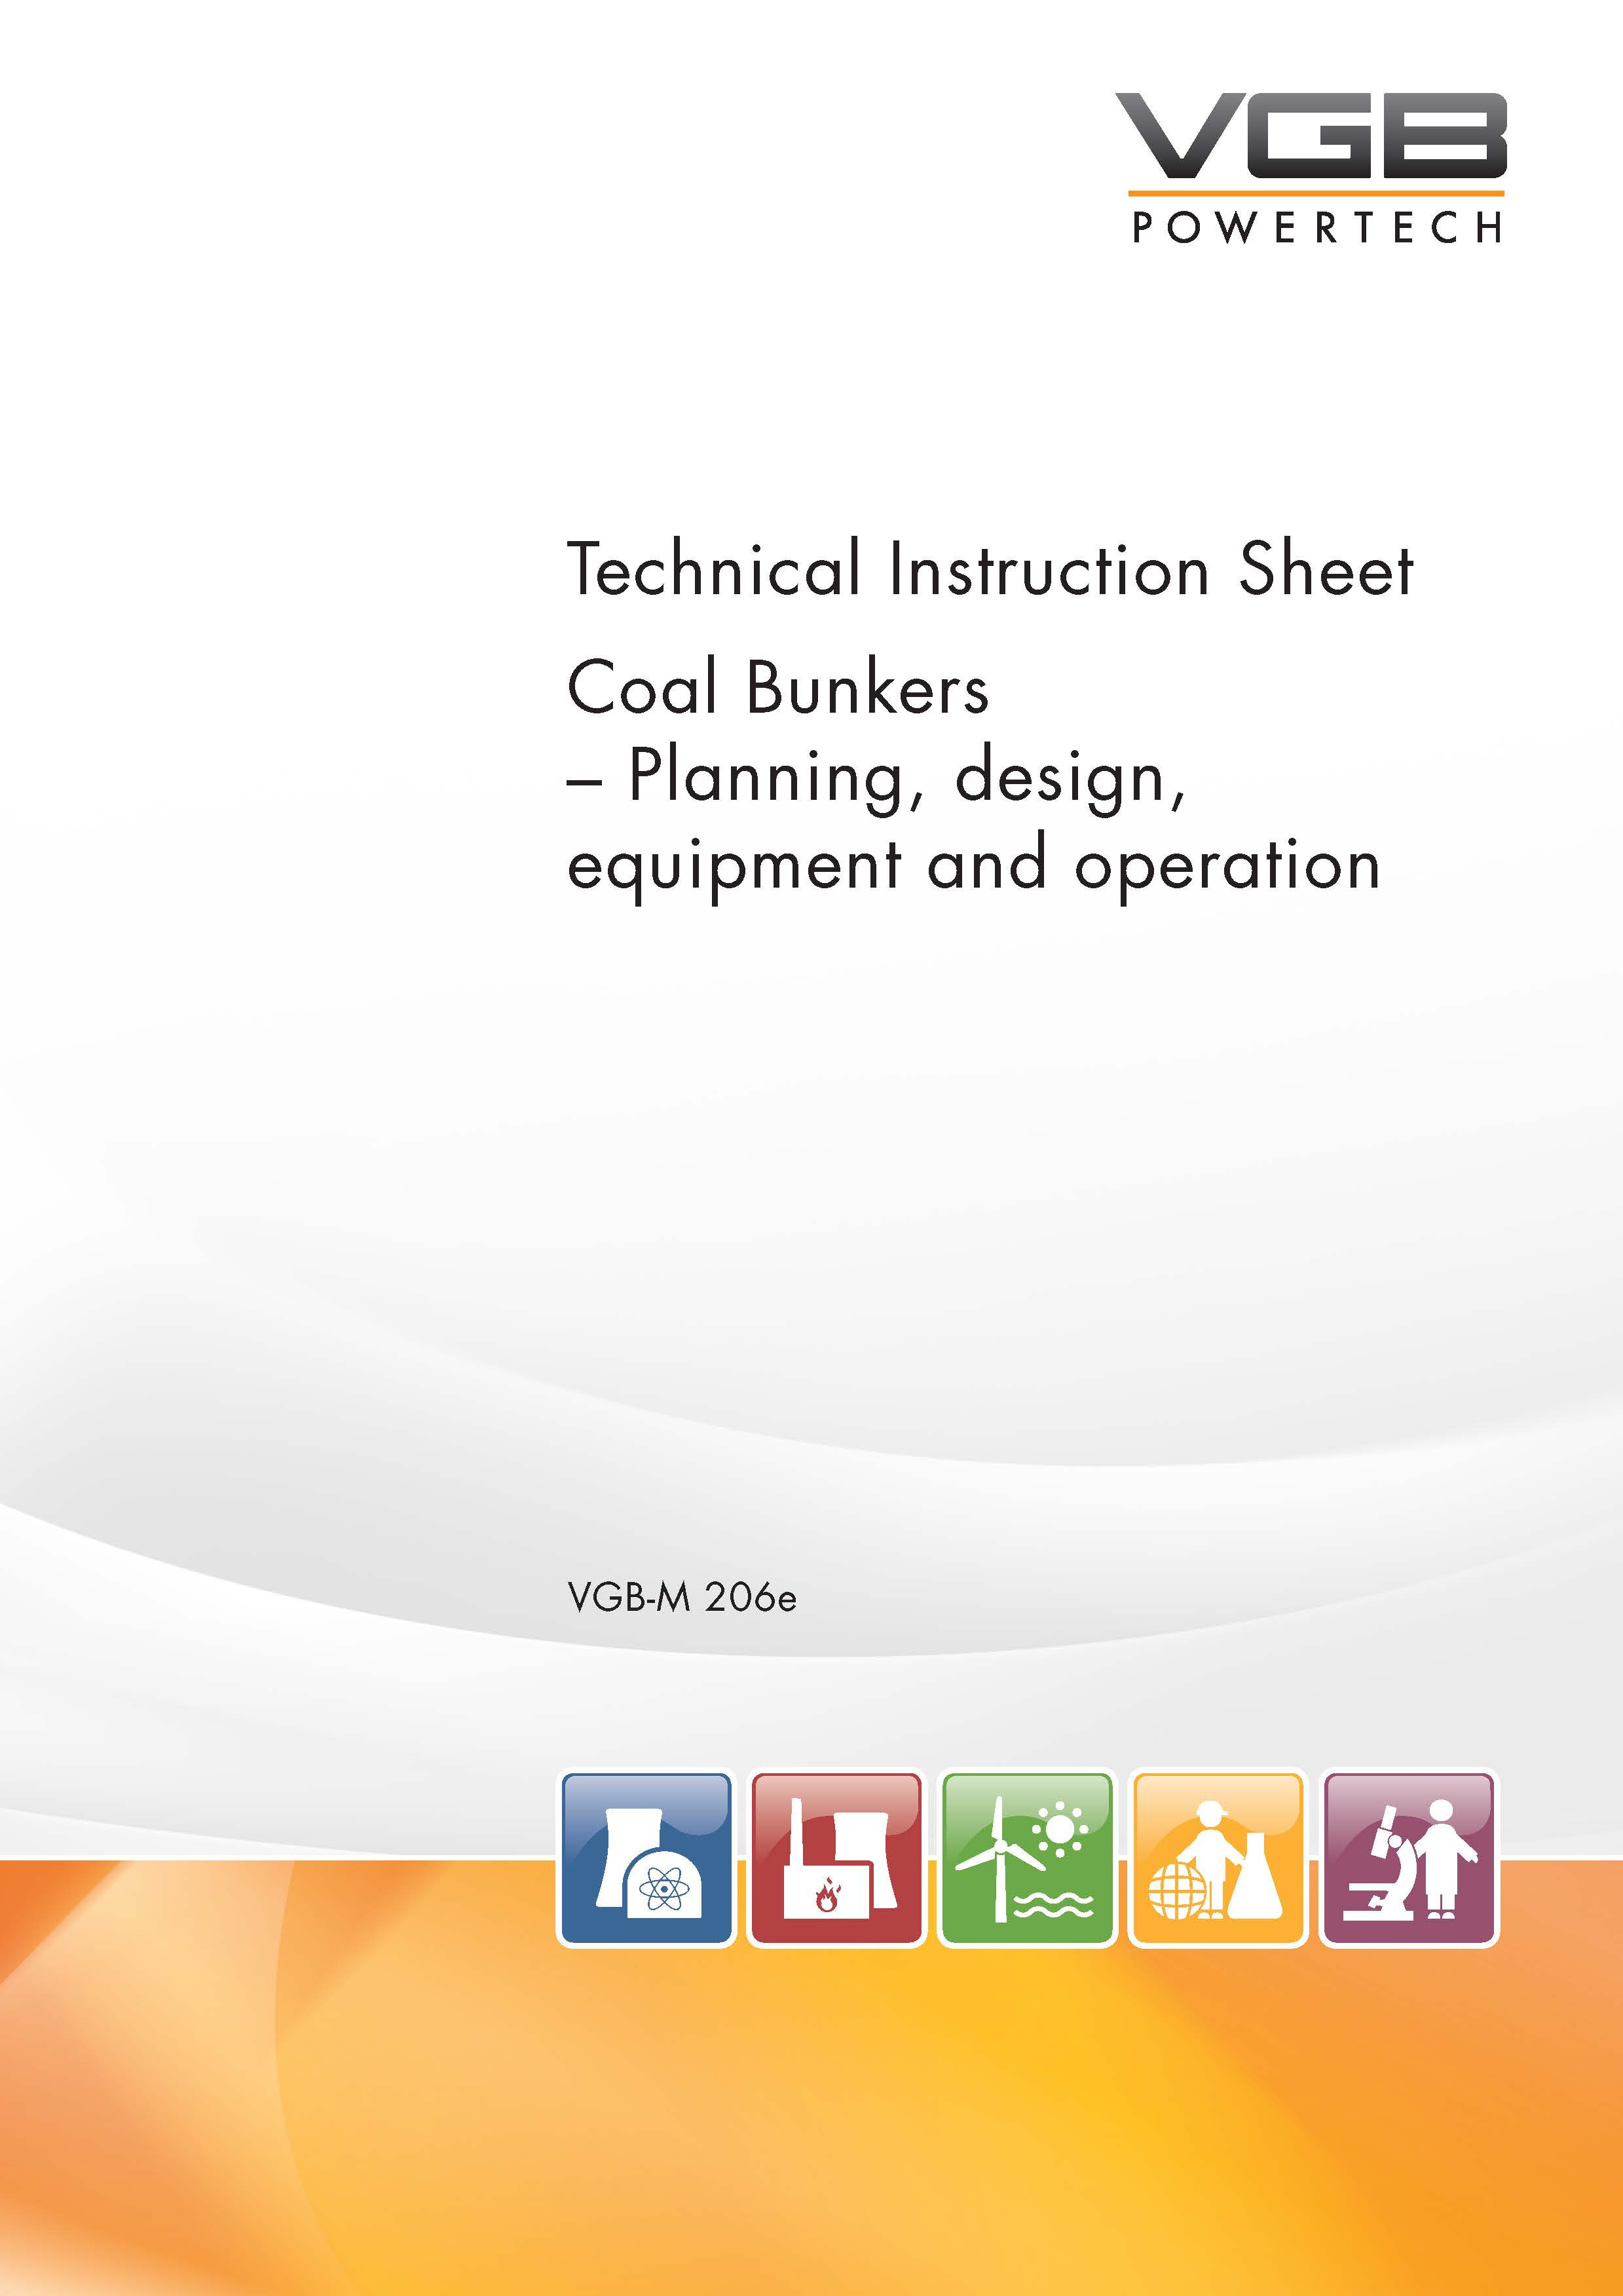 Coal Bunkers – Planning, design, equipment and operation